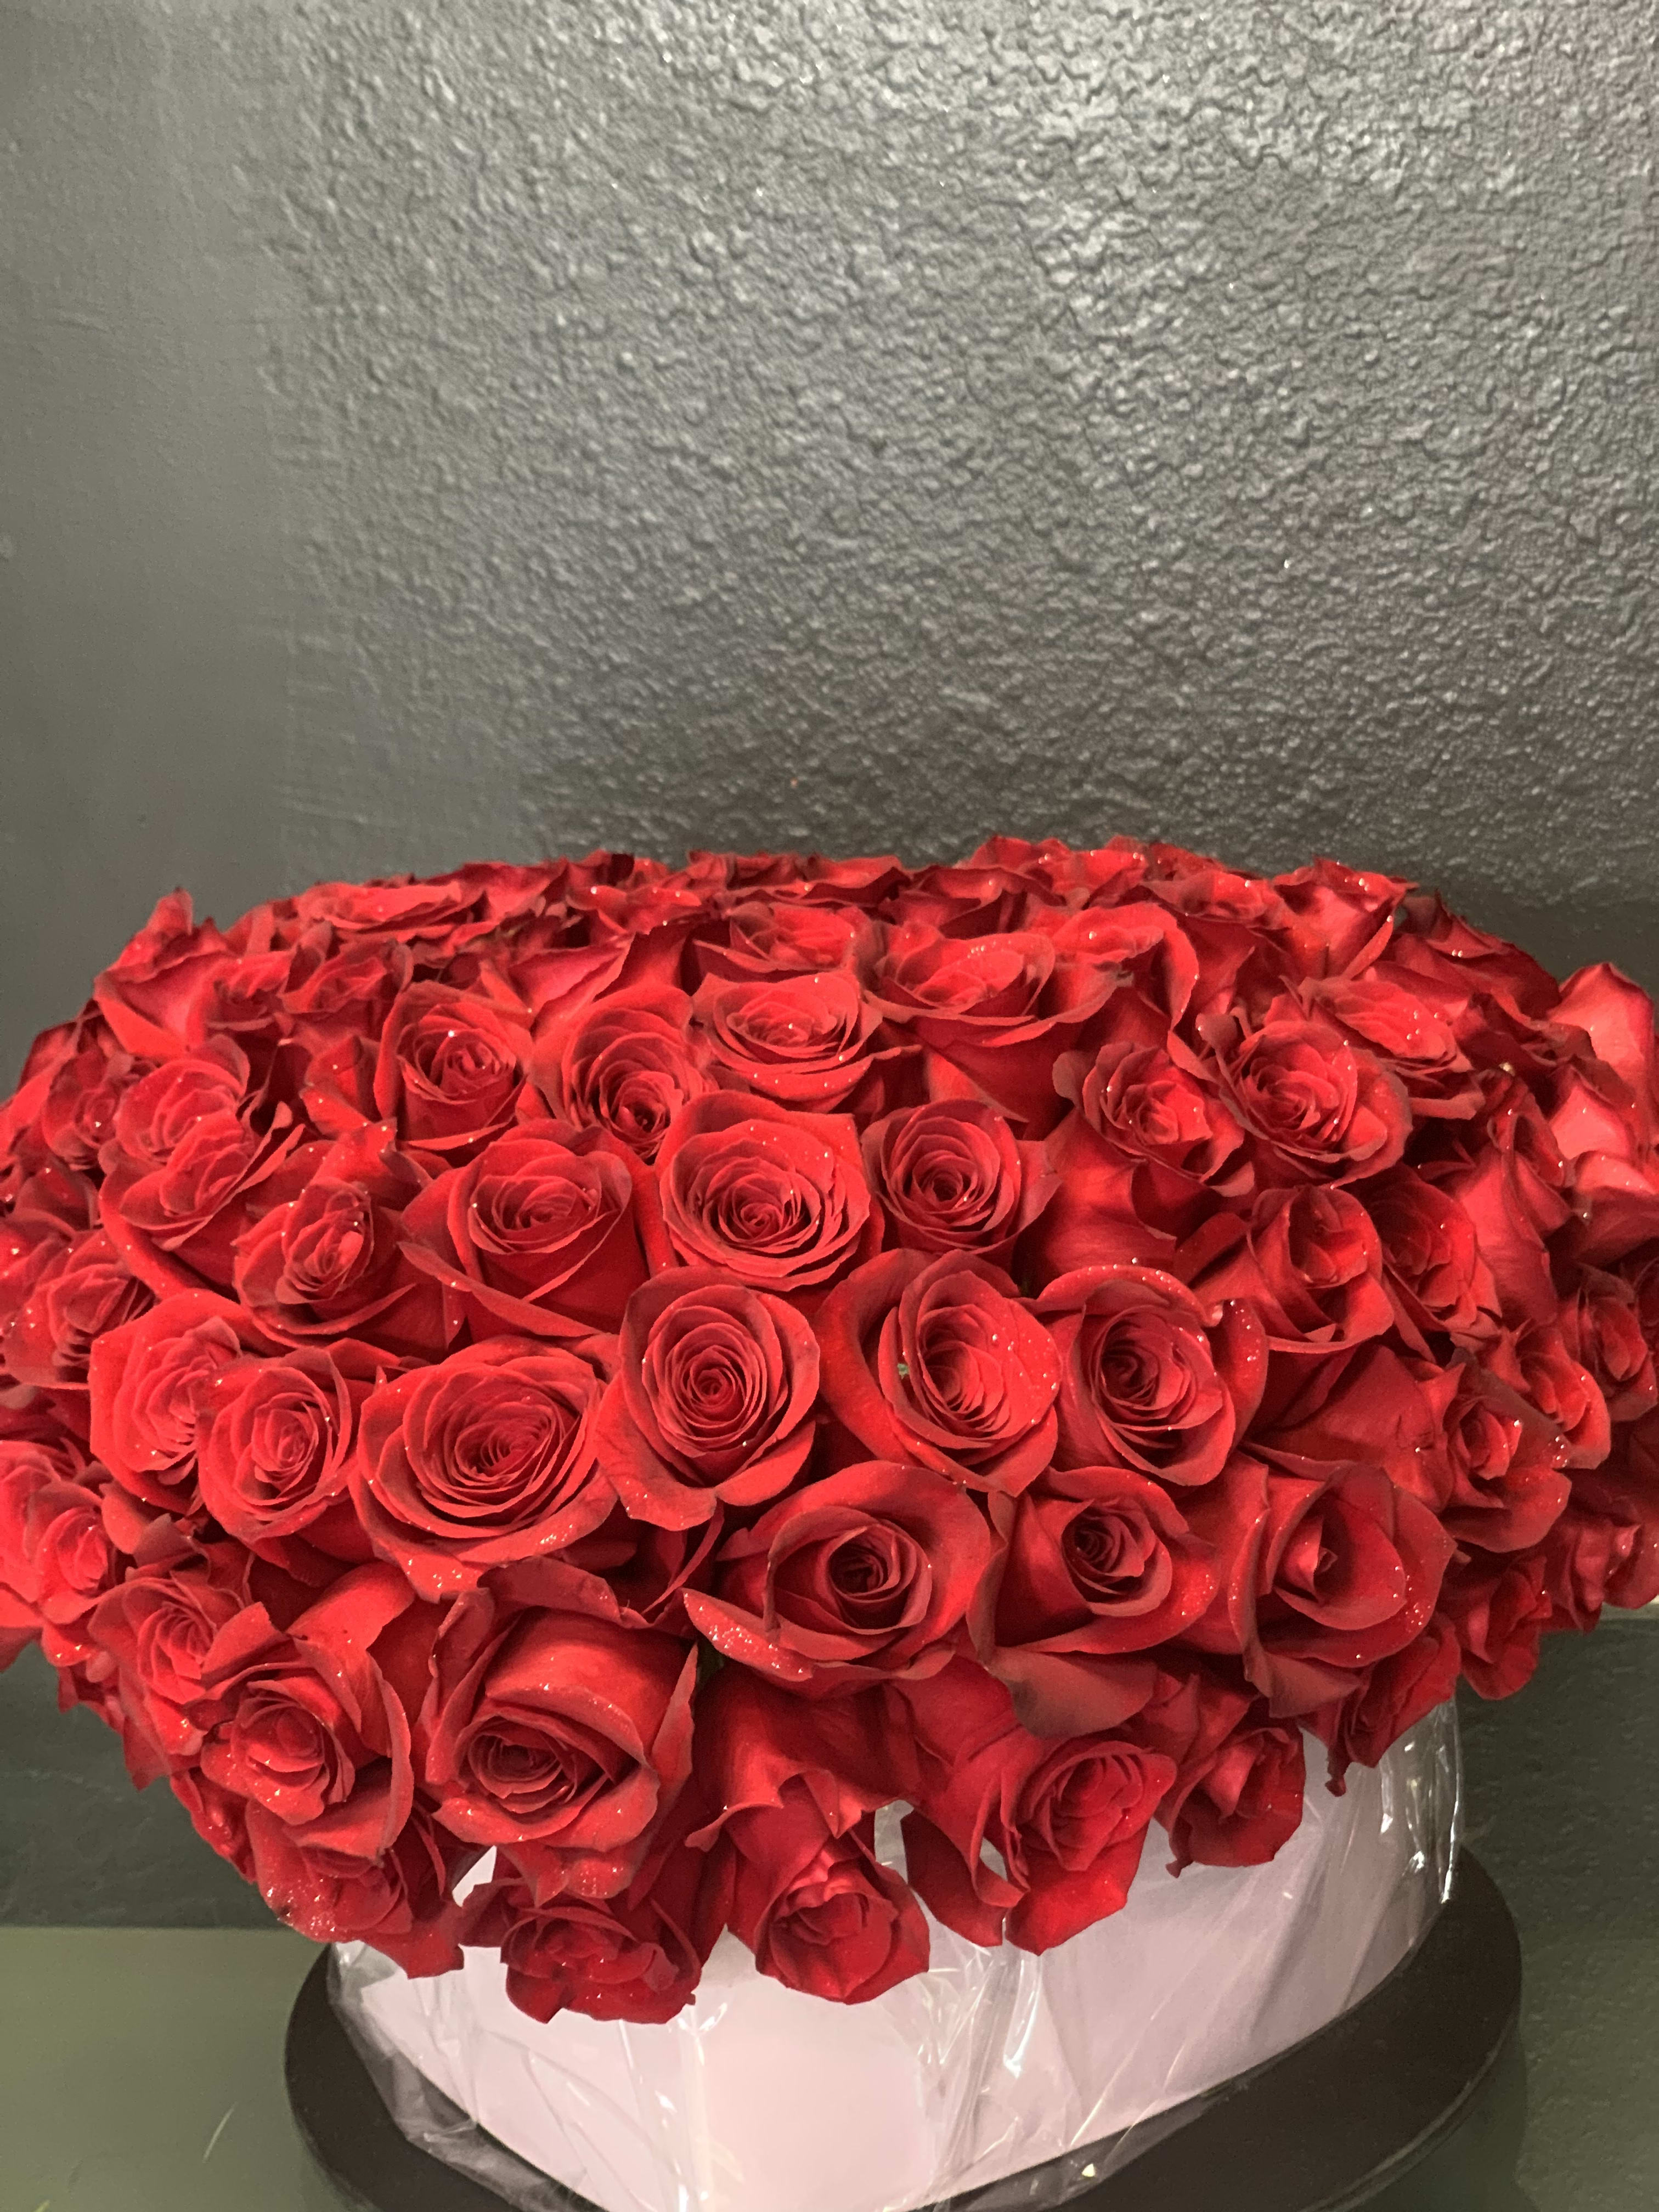 HRT02233 - 10O Stems Ecuatorian Premium Red Roses Approx. Box AS SIMILAR AS POSSIBLE Substitution based on season, flowers availability or any unforeseen or uncontrollable circumstances 